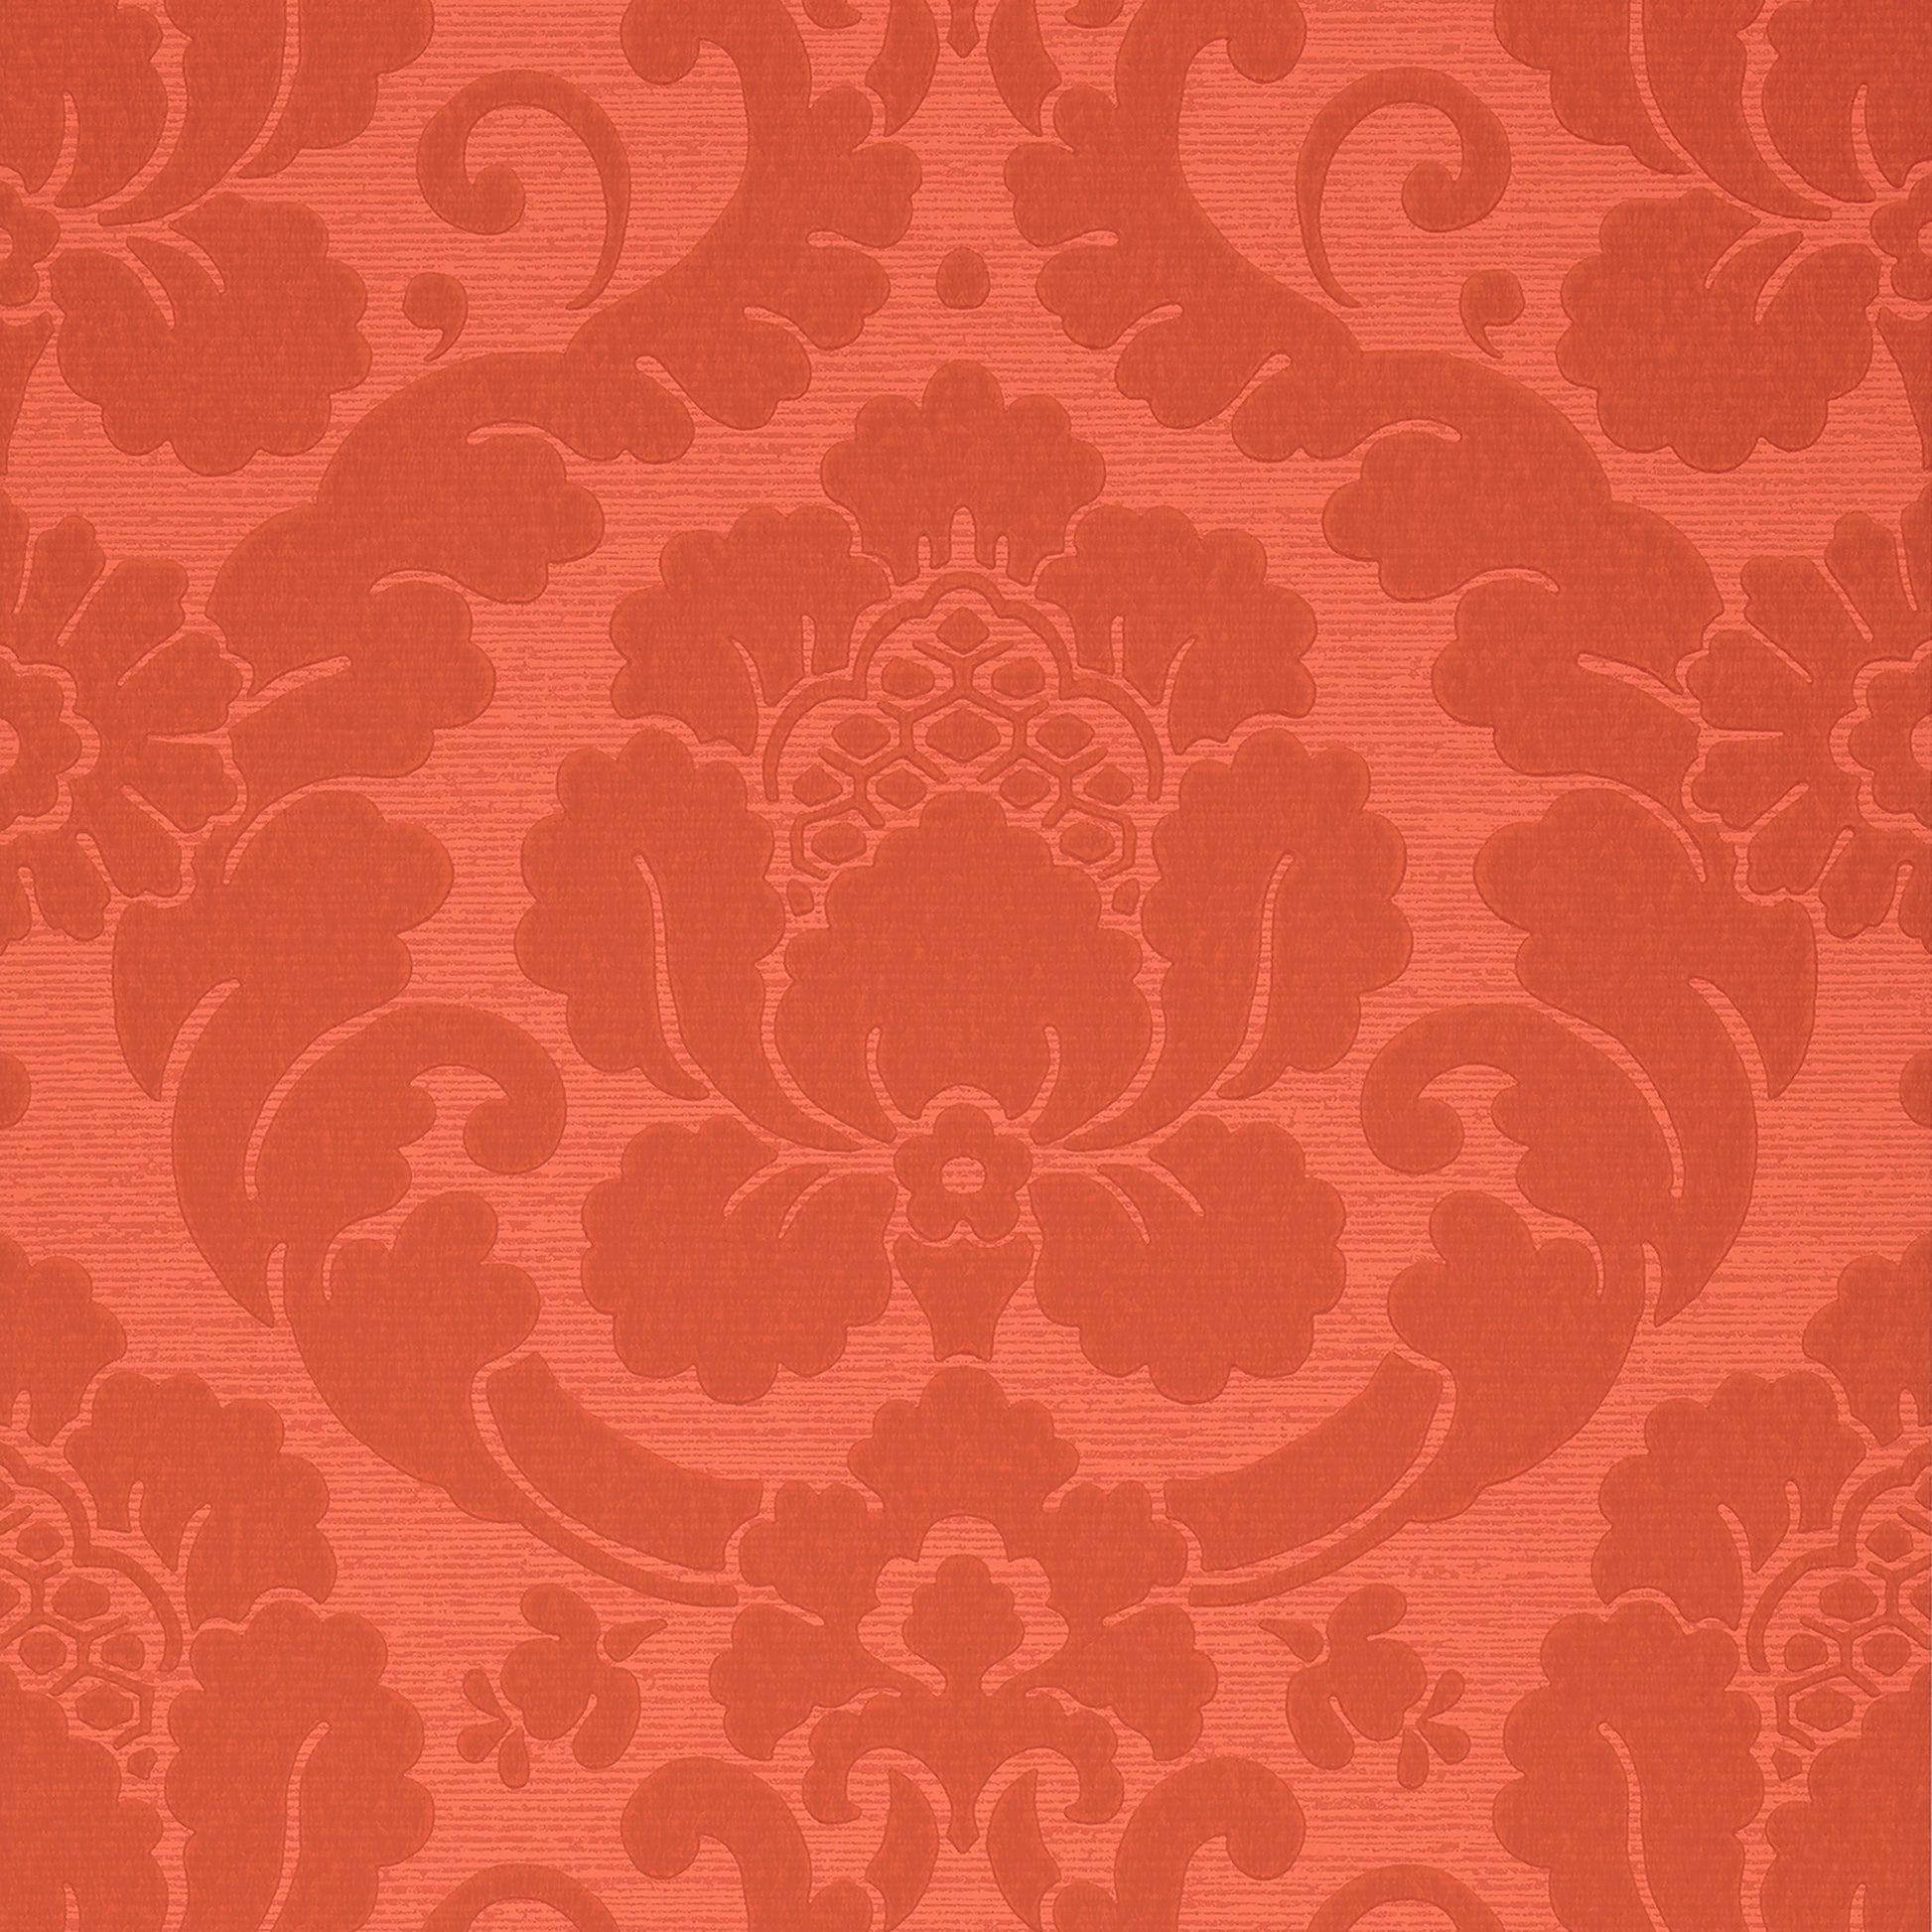 Purchase  Ann French Wallpaper Item AT6135 pattern name  Marlow